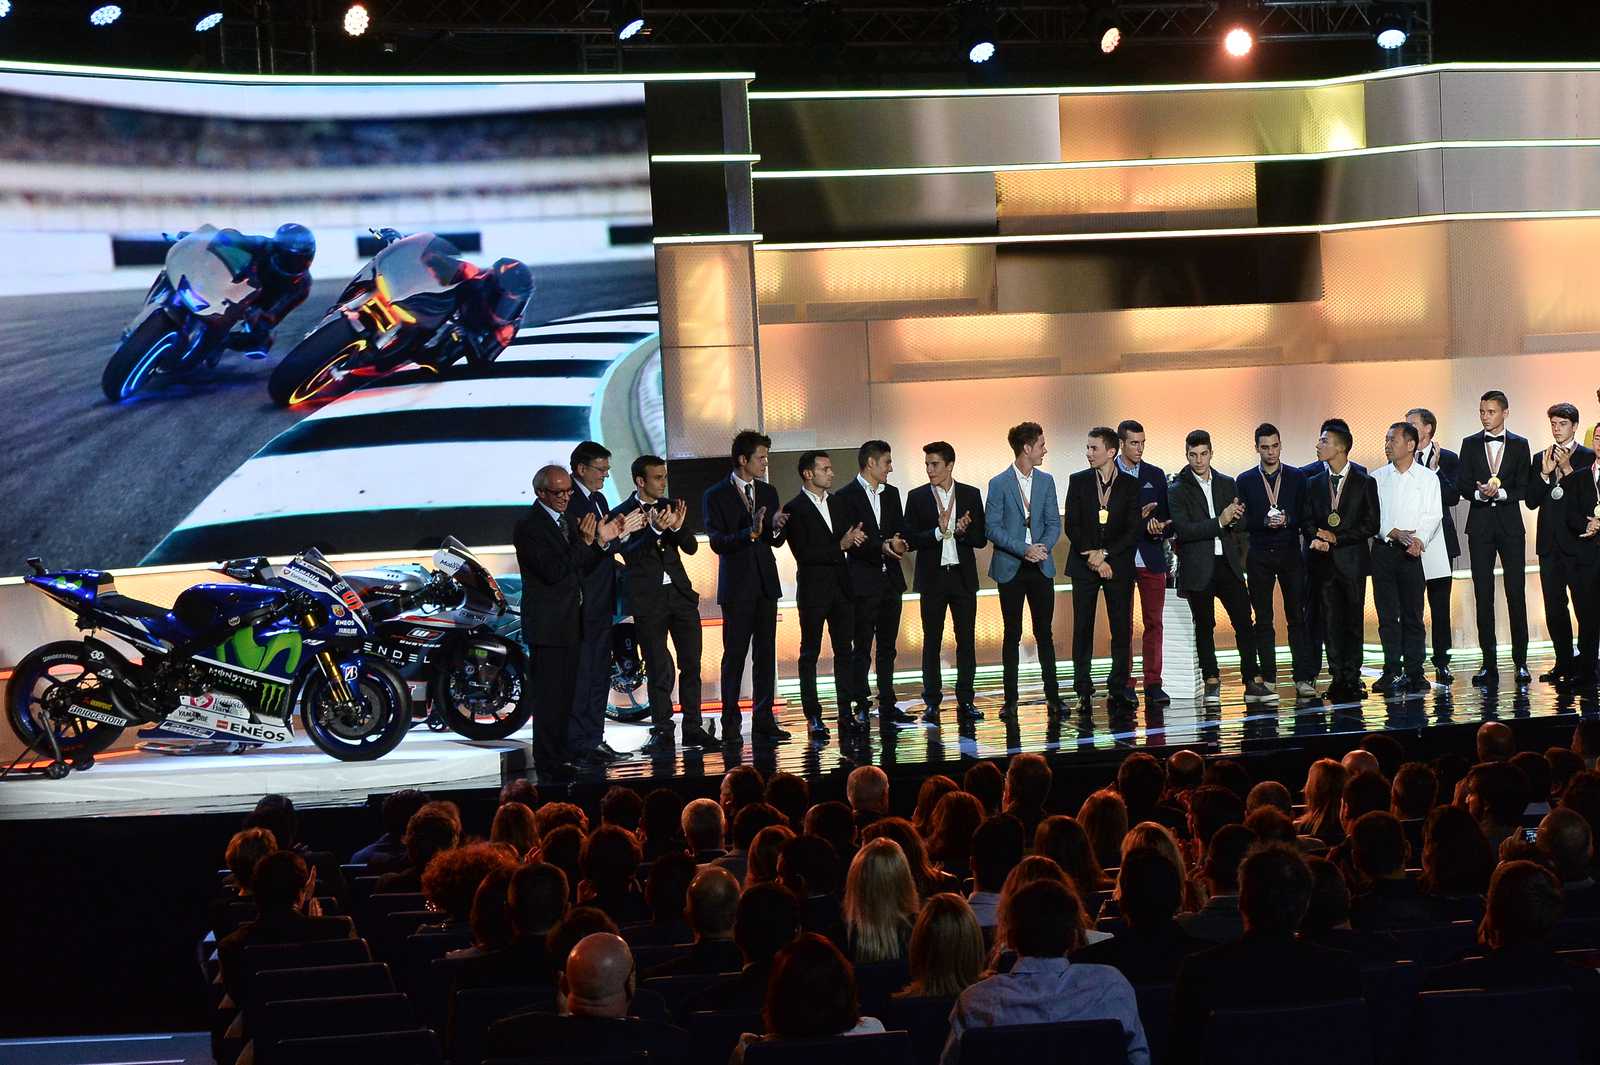 Motogp Season Concludes With Awards Ceremony In Valencia Roadracing World Magazine Motorcycle Riding Racing Tech News